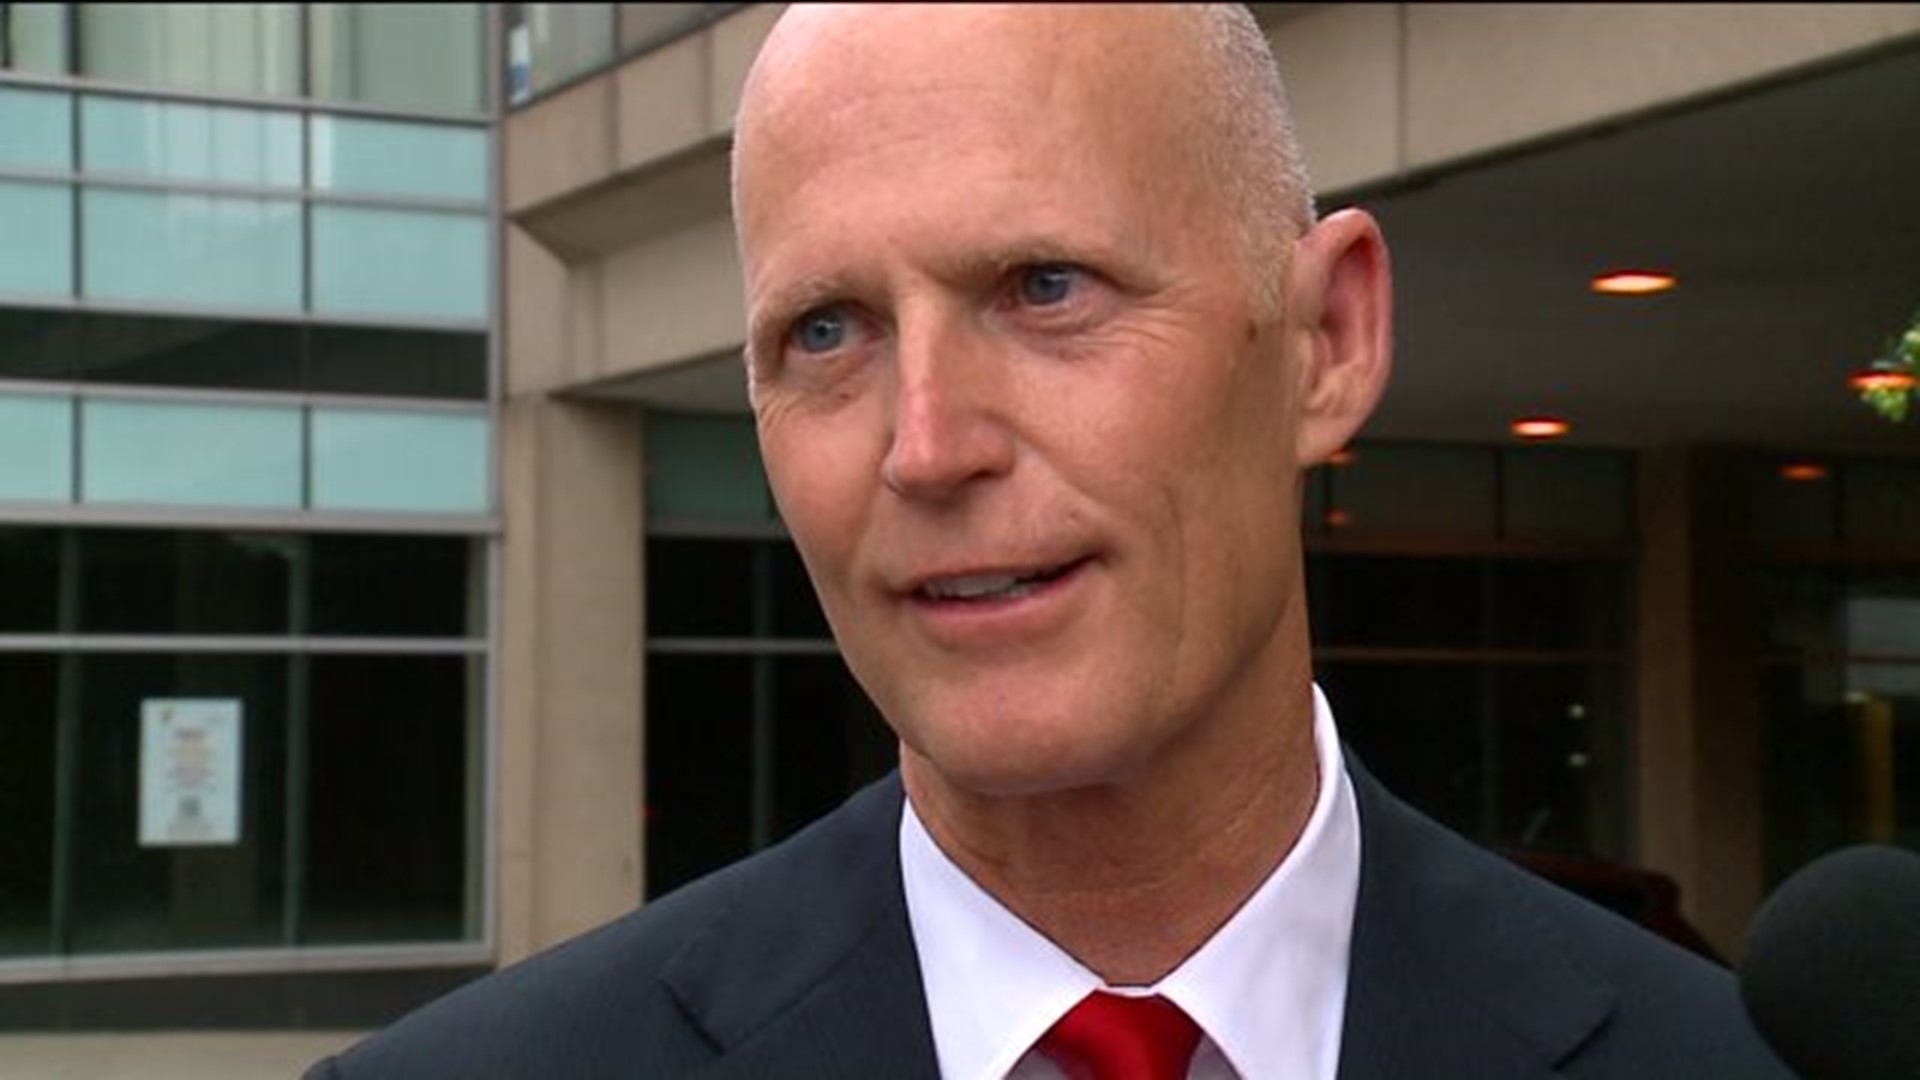 Florida governor not shy about wanting to poach Connecticut companies